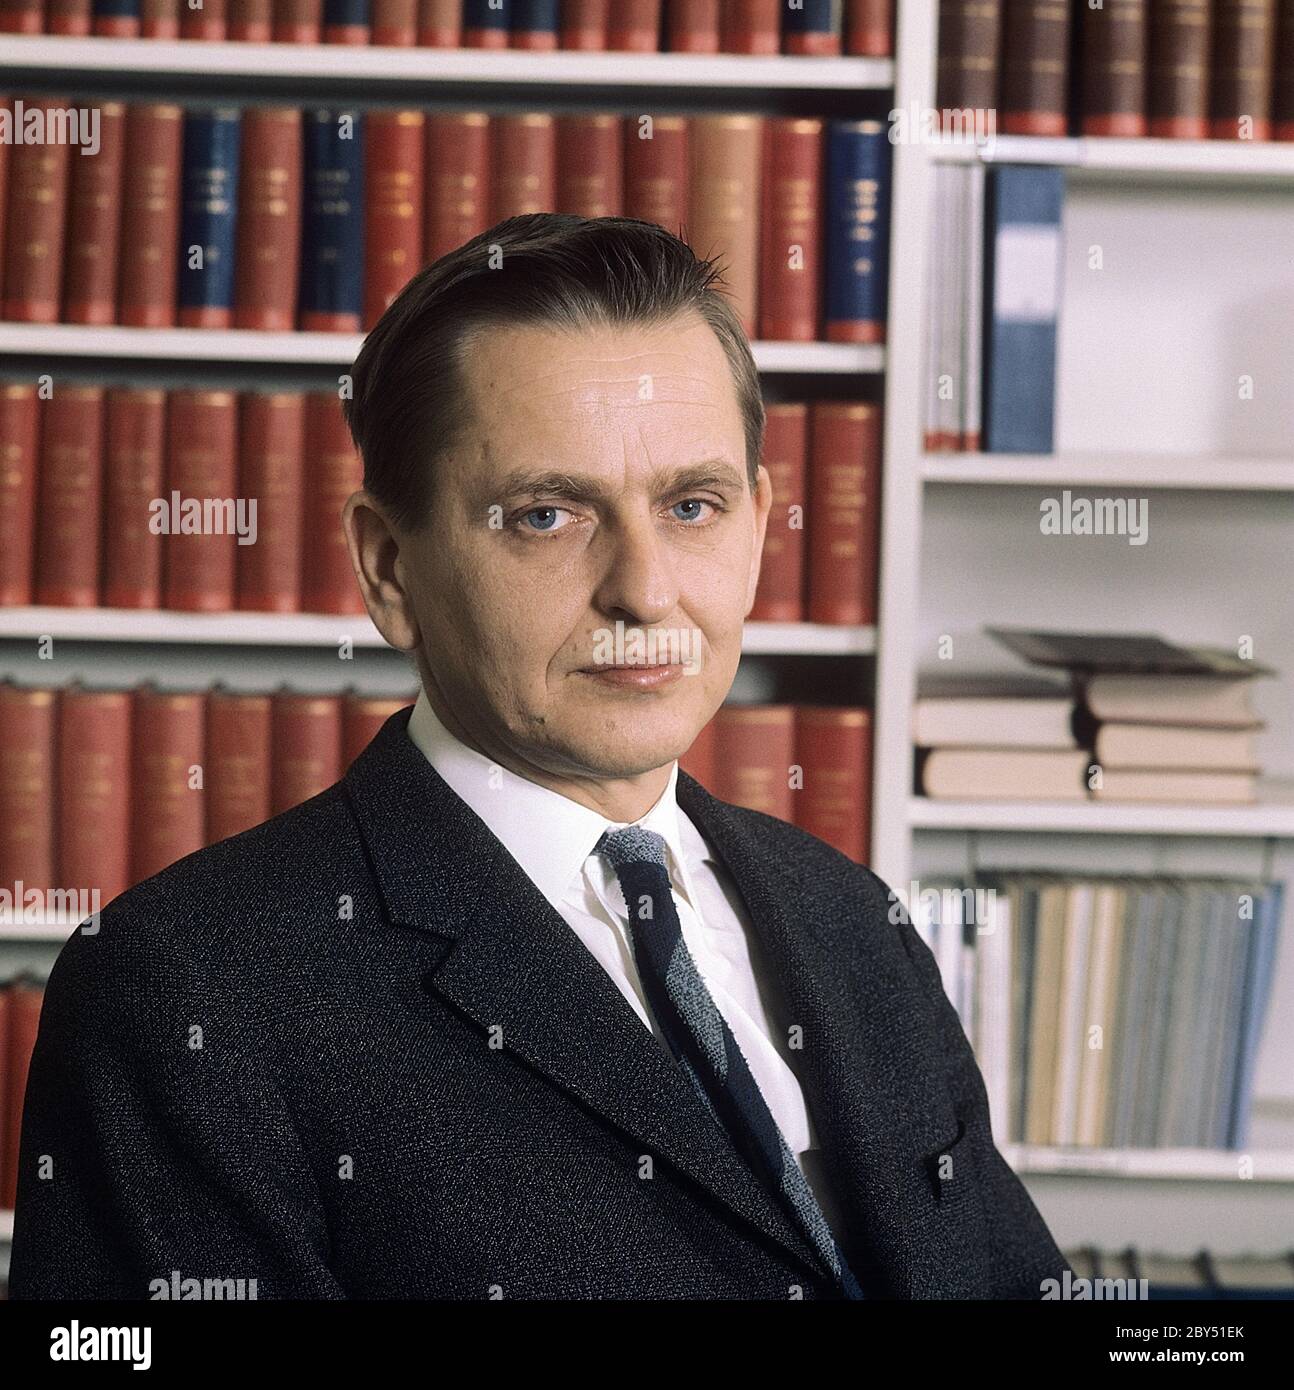 Olof Palme. Swedish social democratic politican and prime minister. Born october 14 1927. Murdered february 28 1985. Pictured here in on january 9 1971 Stock Photo